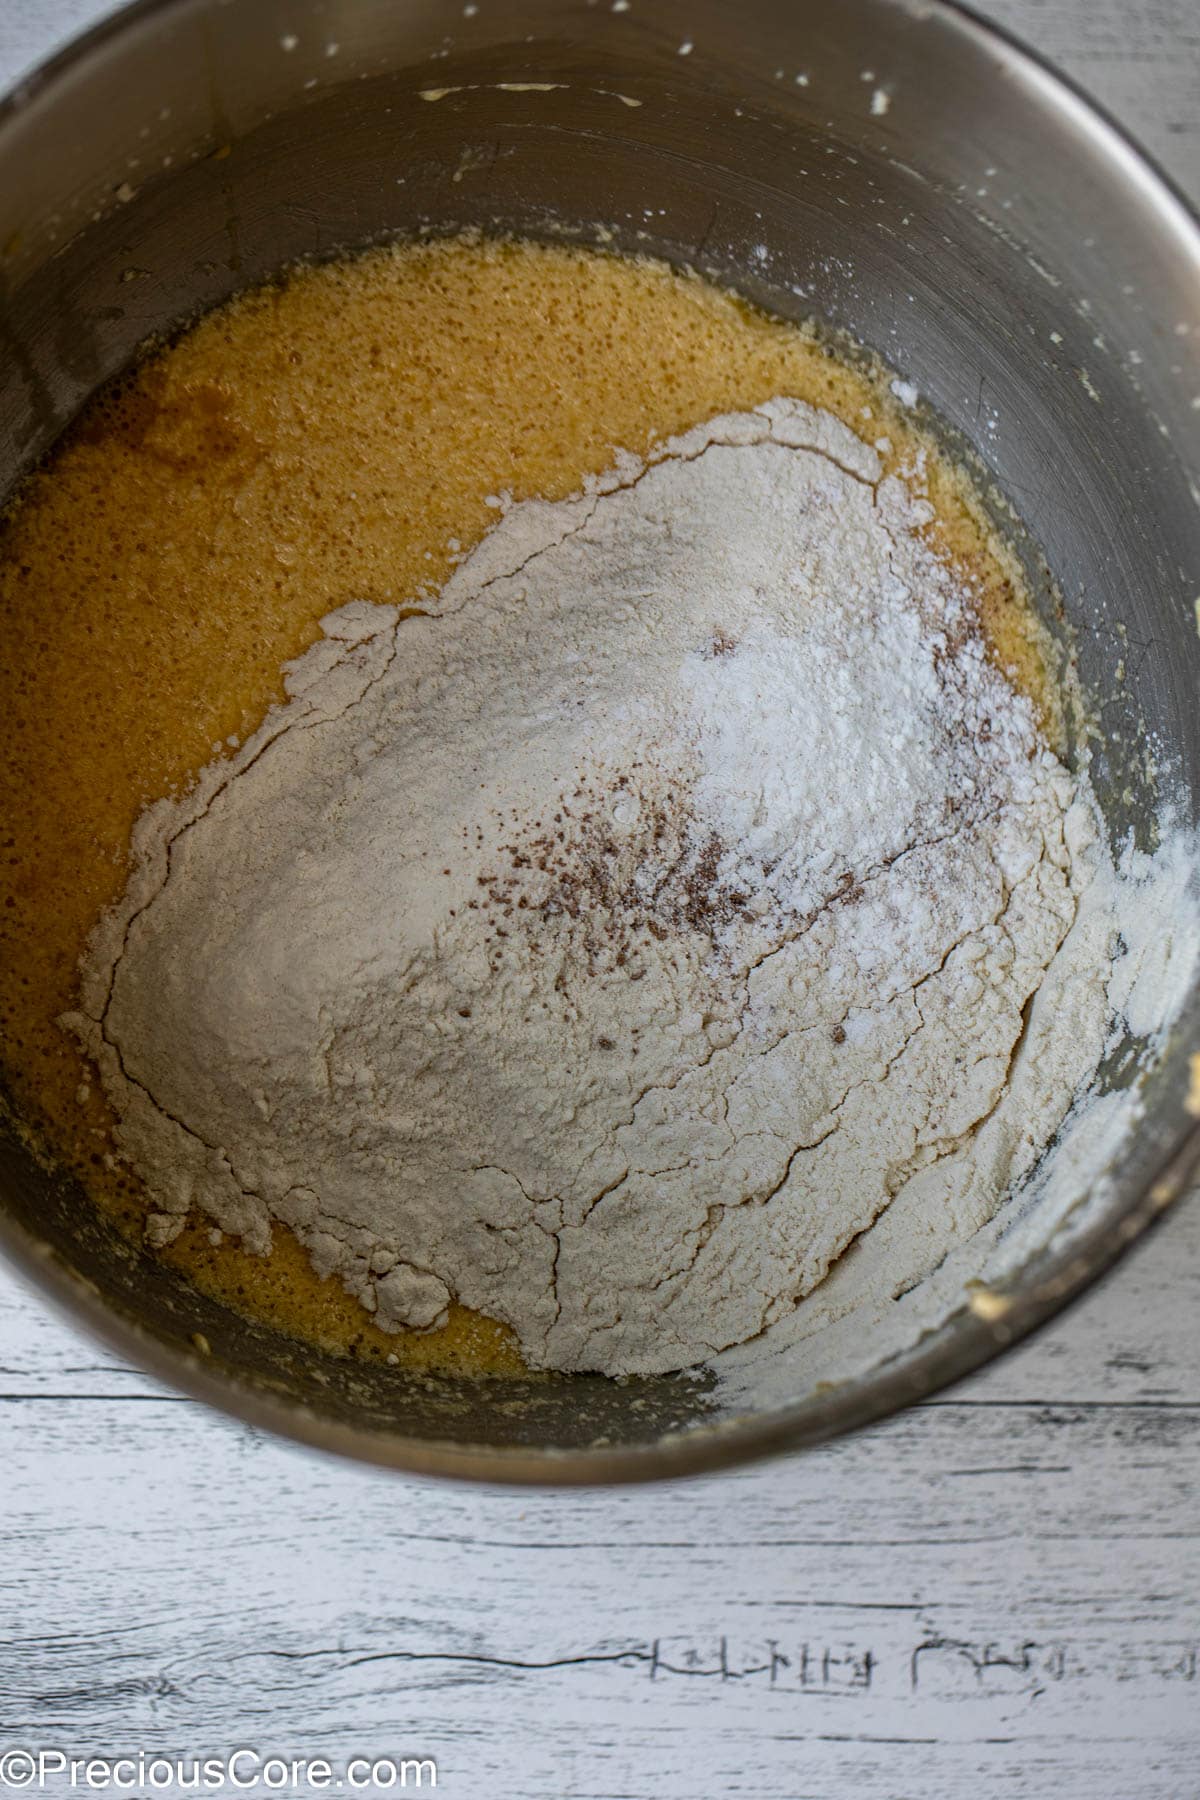 Dry ingredients added to cake batter.